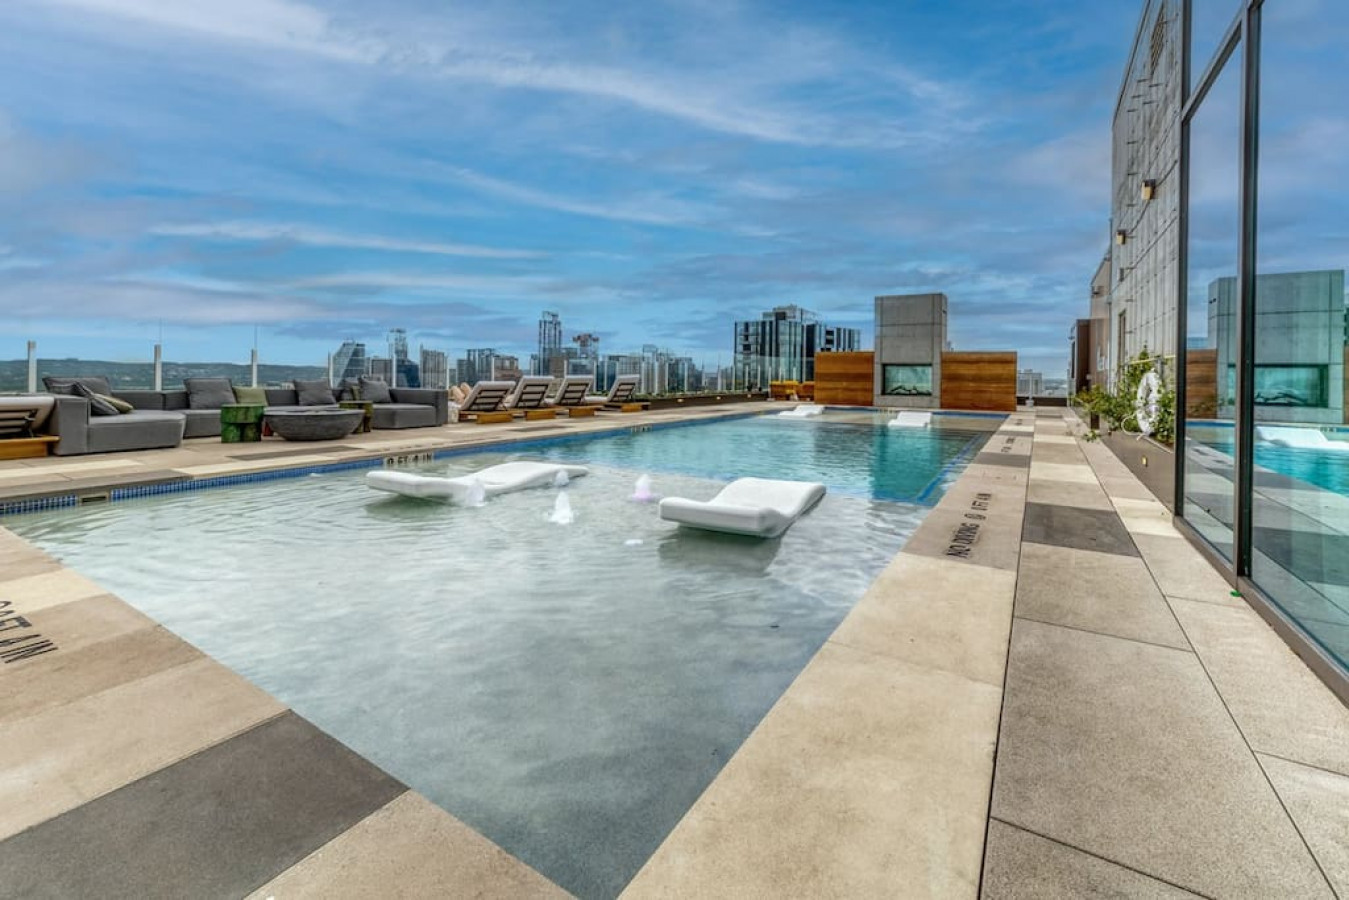 Property Image 2 - Del Rio at the Rainey District - 29th Floor - Views - Rooftop Pool - Gym